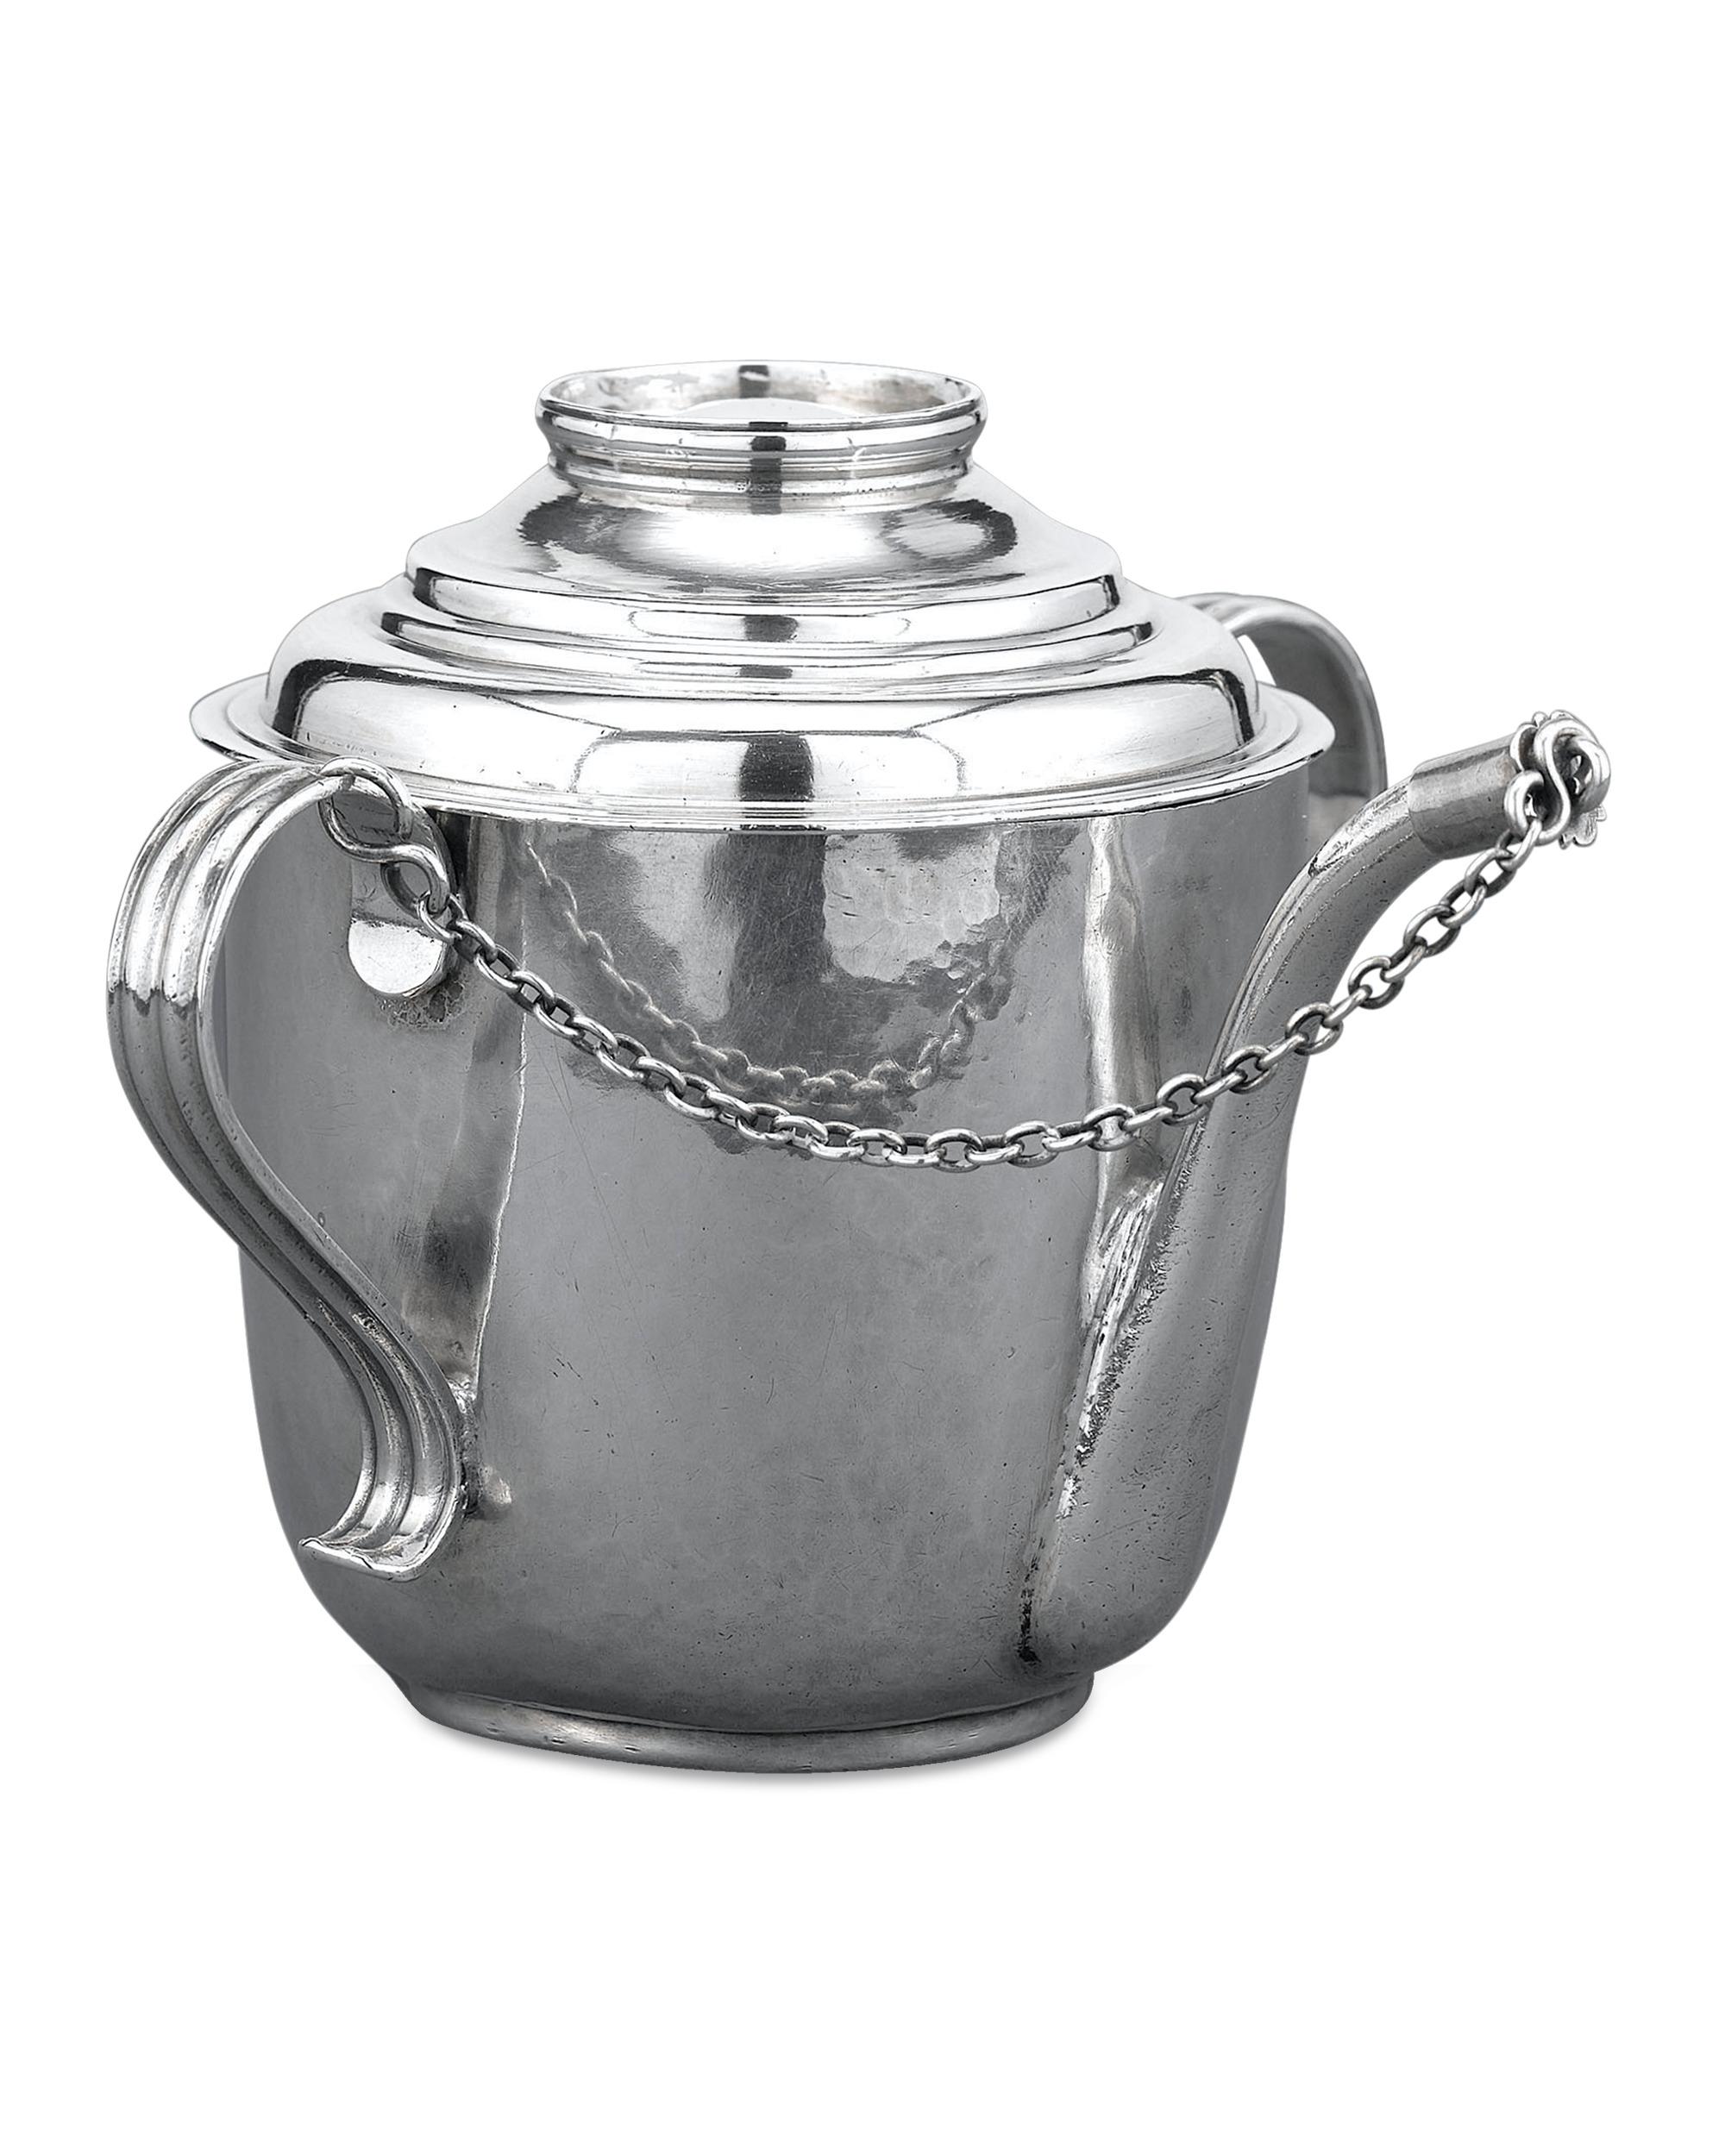 This extremely rare, Queen Anne-period silver feeding cup gives a glimpse into the daily life of 18th-century, England. Crafted by silversmith John East, this subtly designed covered cup would have held broth or thin porridge to nourish a young